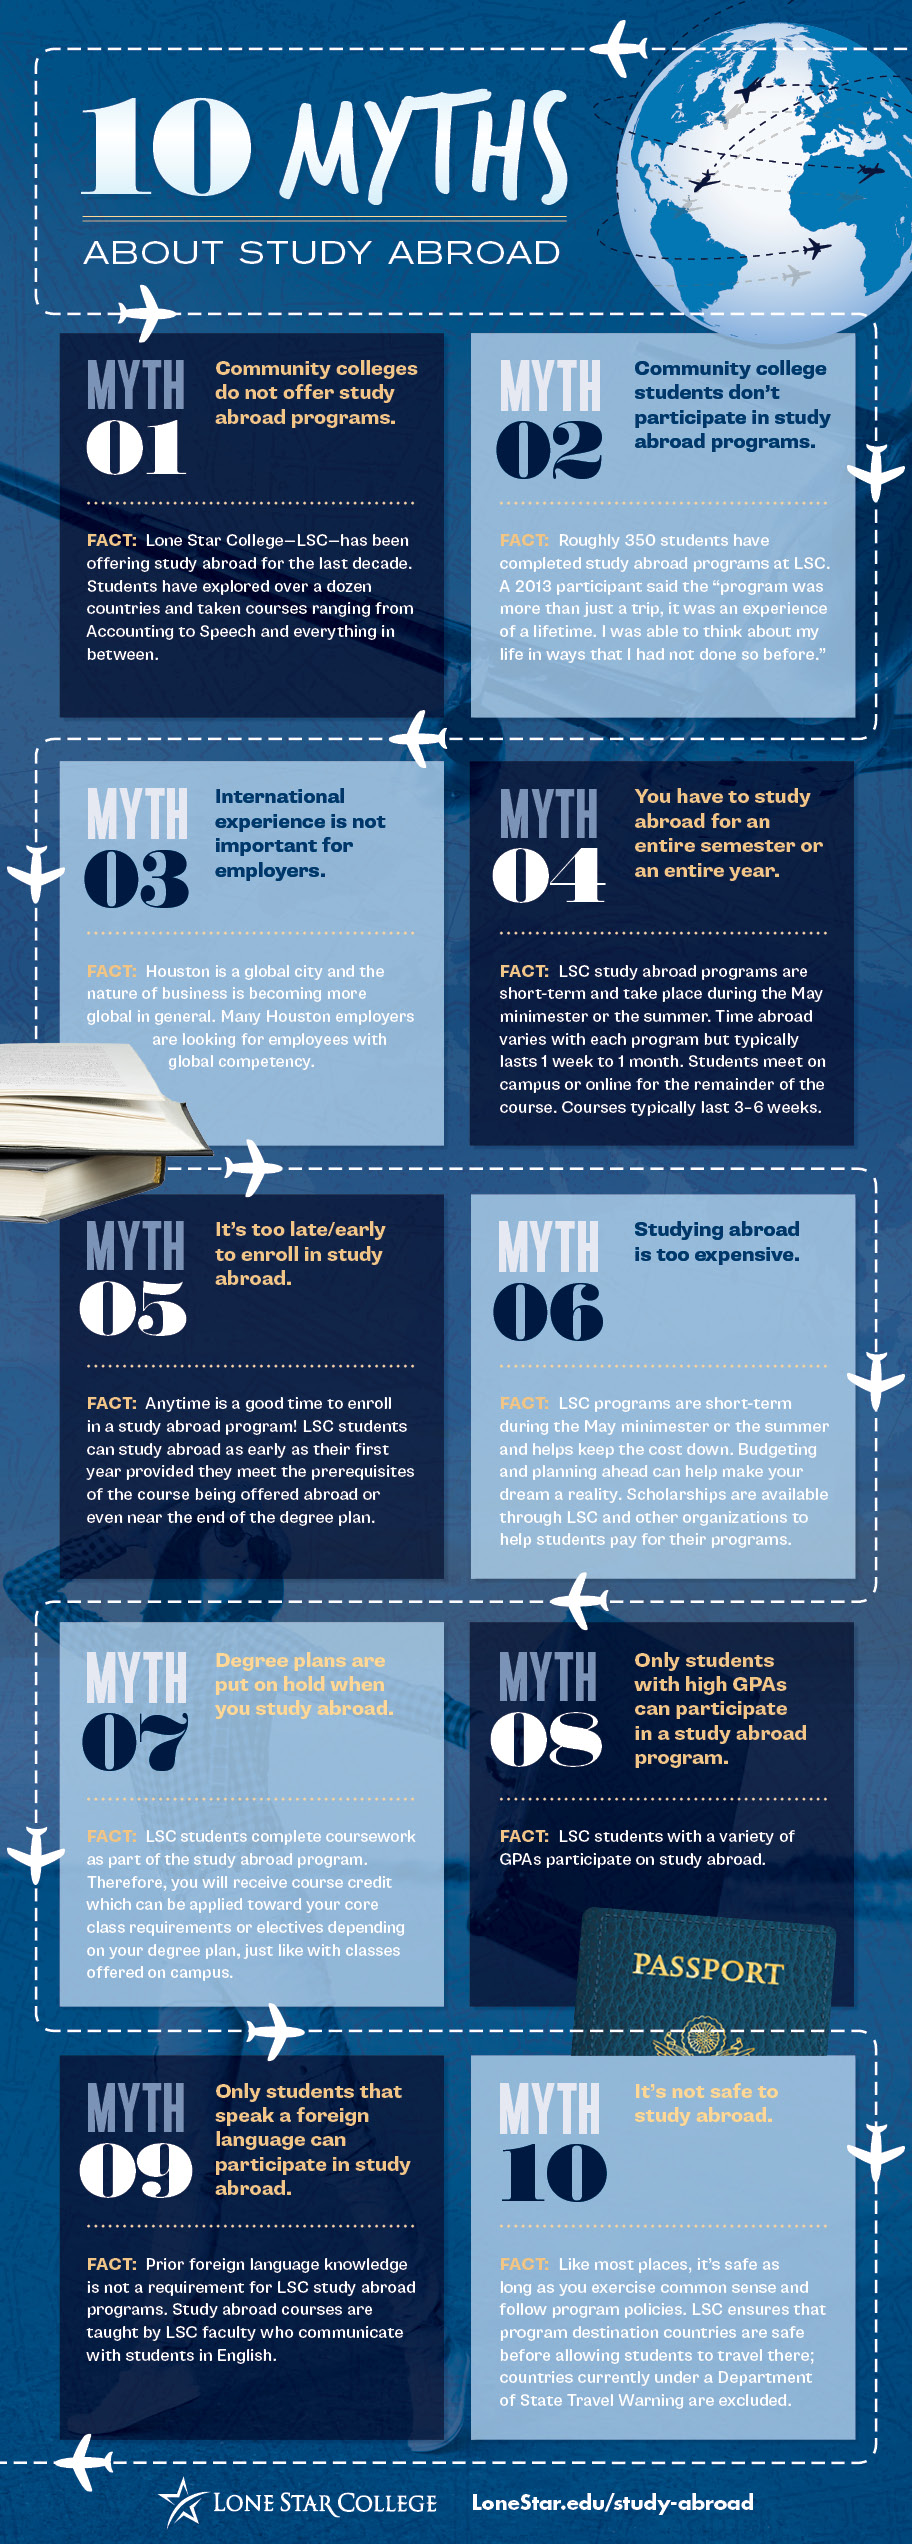 Ten Myths about Study Abroad